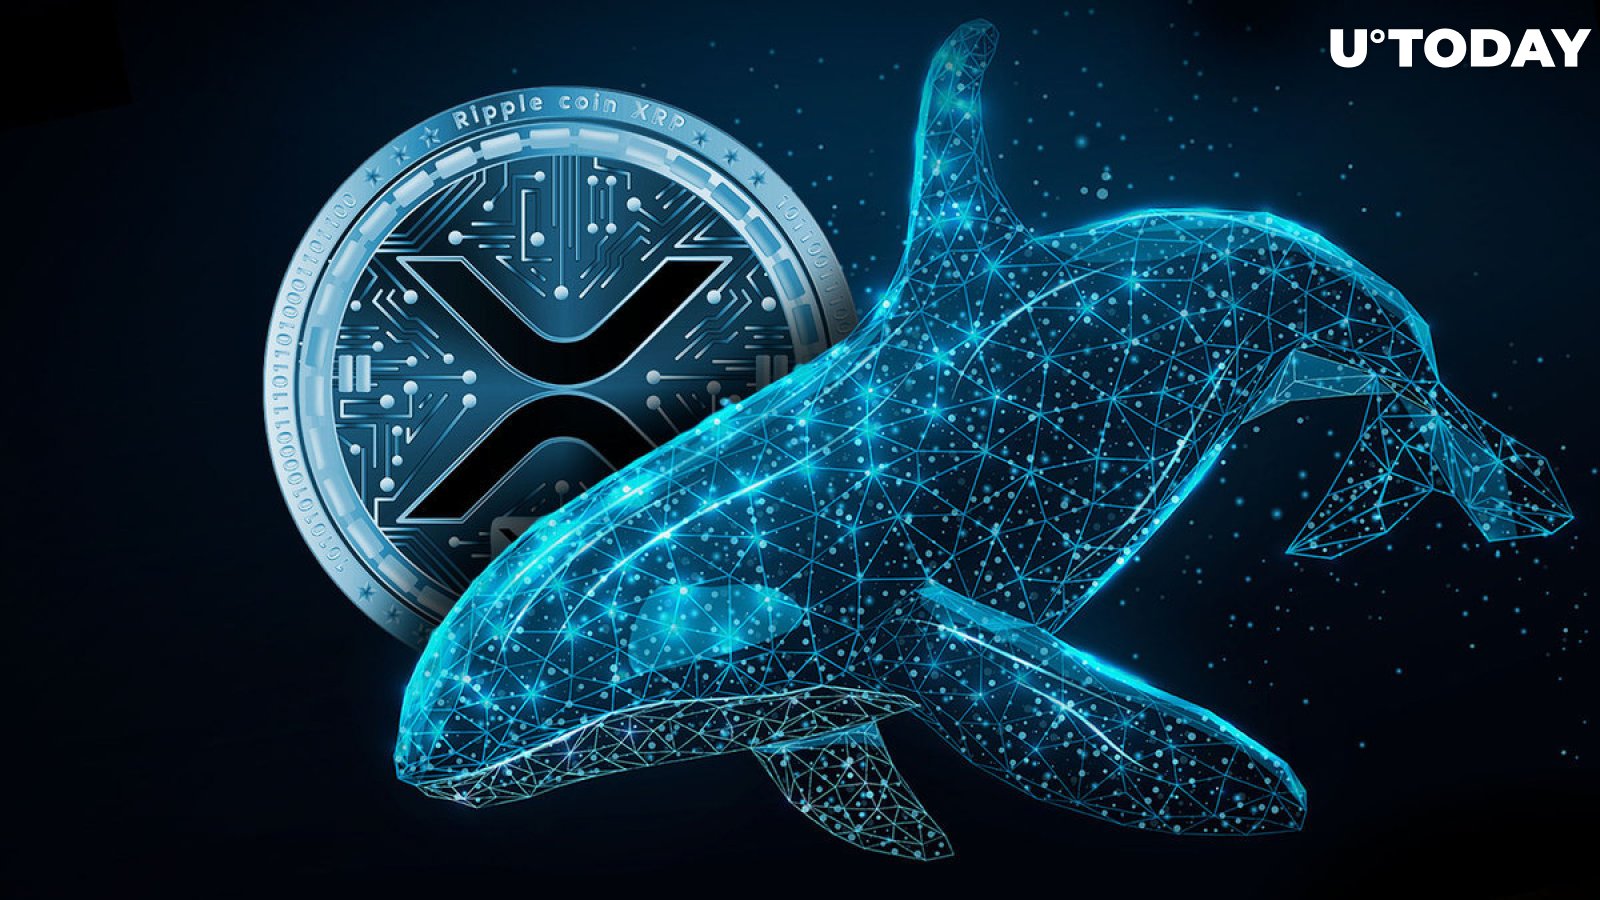 33.33 Million XRP Mysteriously Departs Major Exchange for Enigmatic Whale